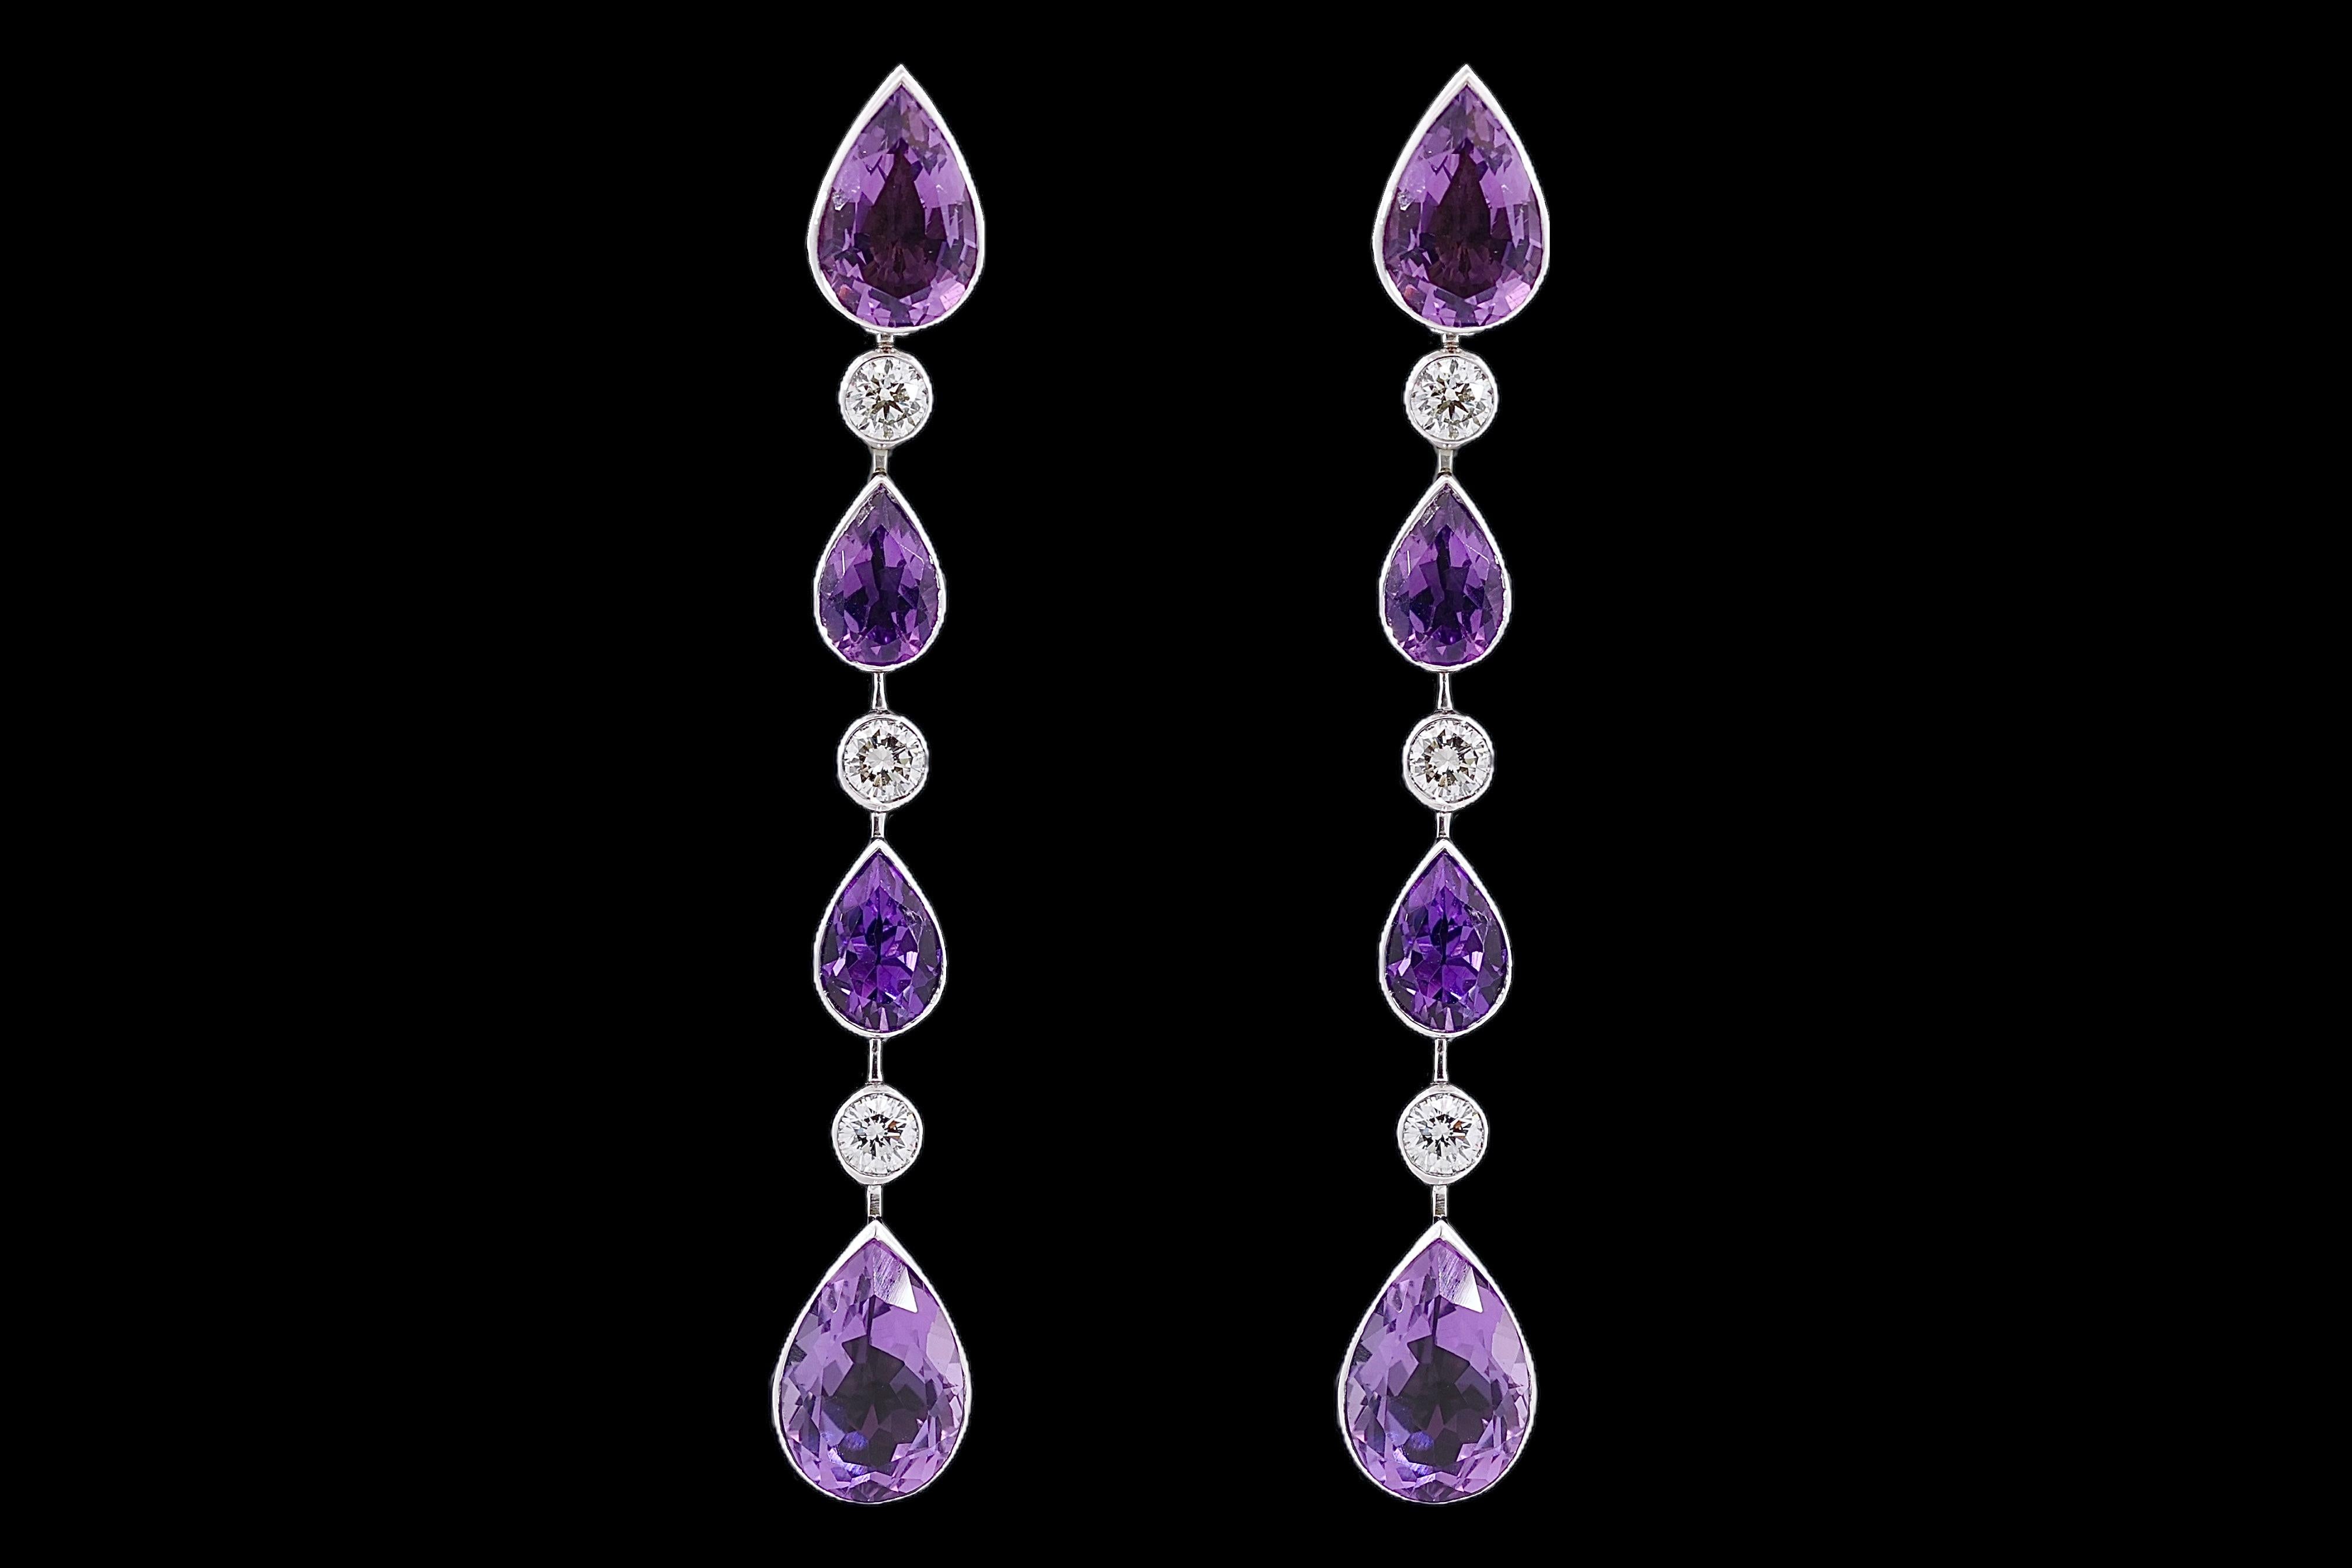 Artisan 18 Kt White Gold Earrings with 18.43ct Amethyst & 1.55ct Brilliant Cut Diamonds For Sale